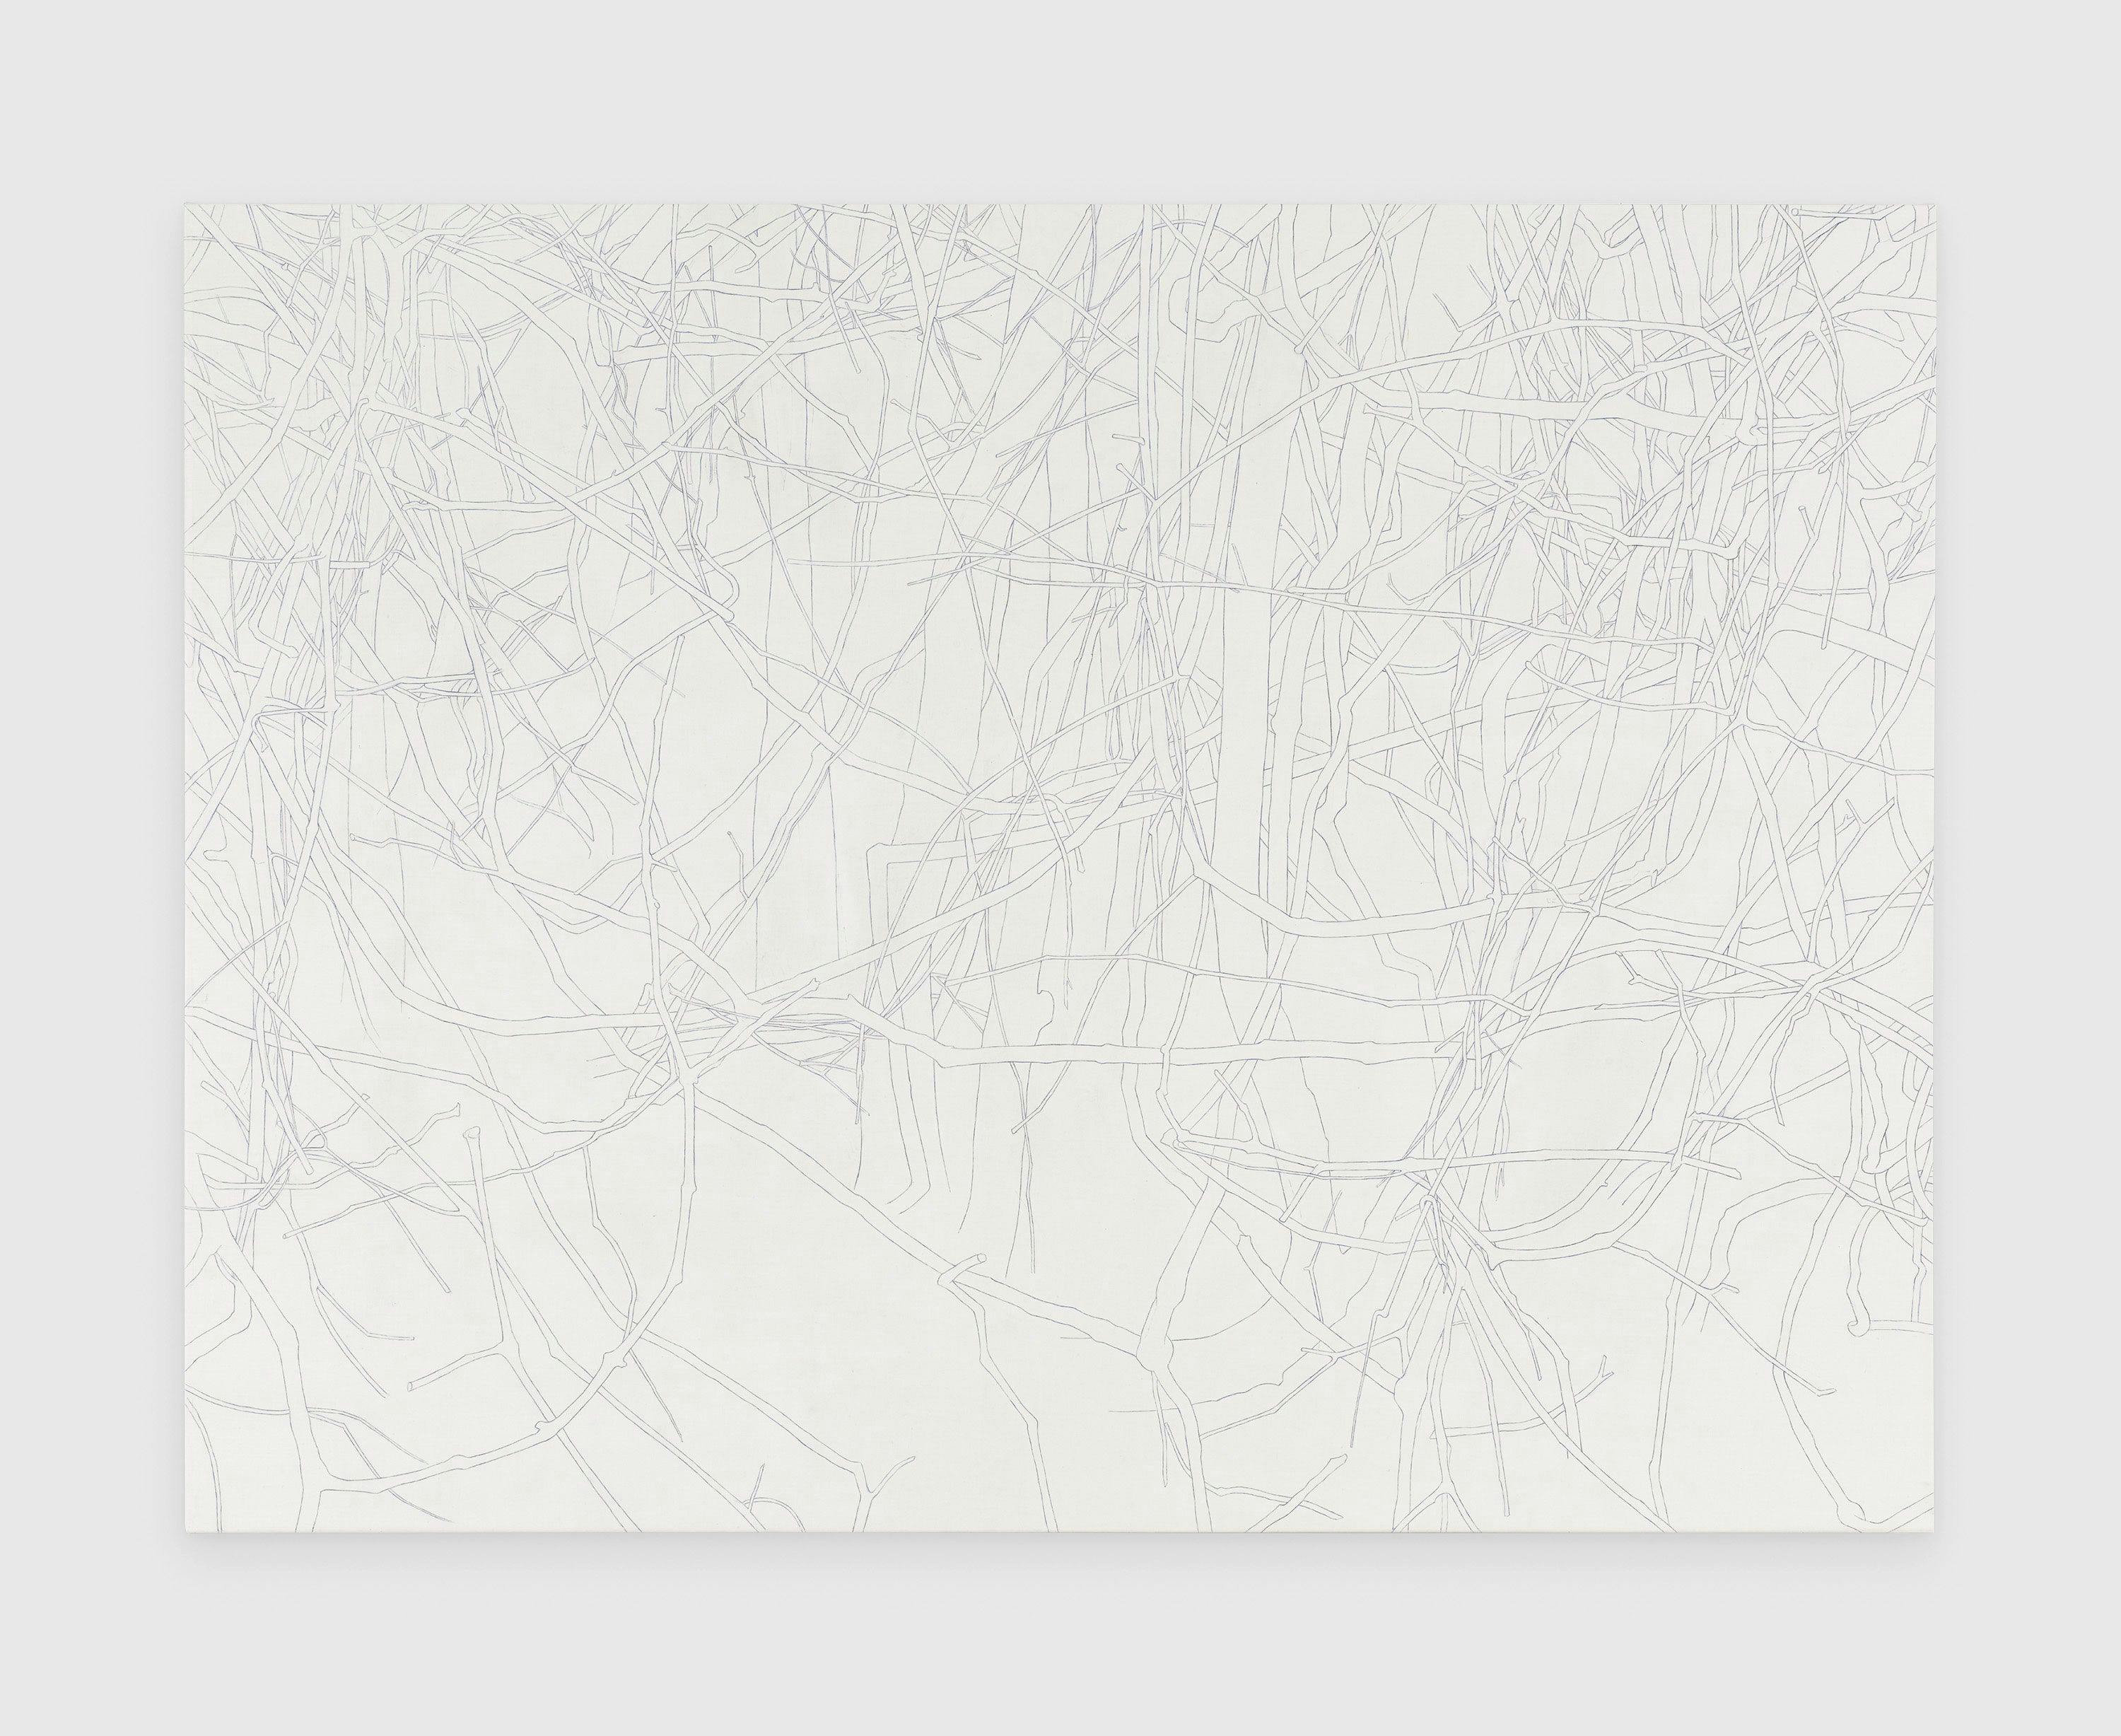 A painting by Toba Khedoori, called Untitled (branches 2), dated 2012.